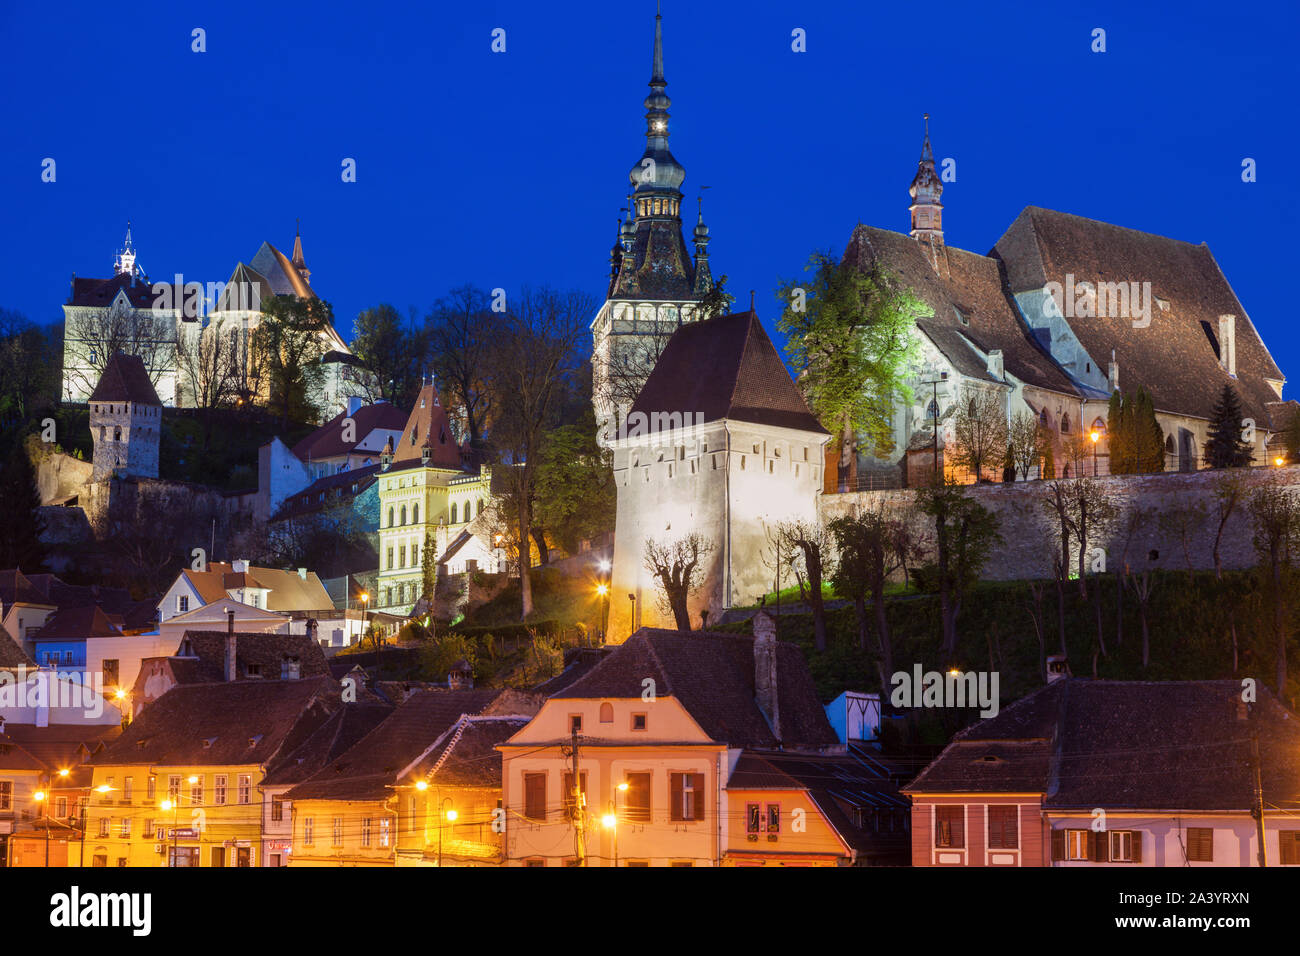 Old town at night in Sighisoara, Romania Stock Photo